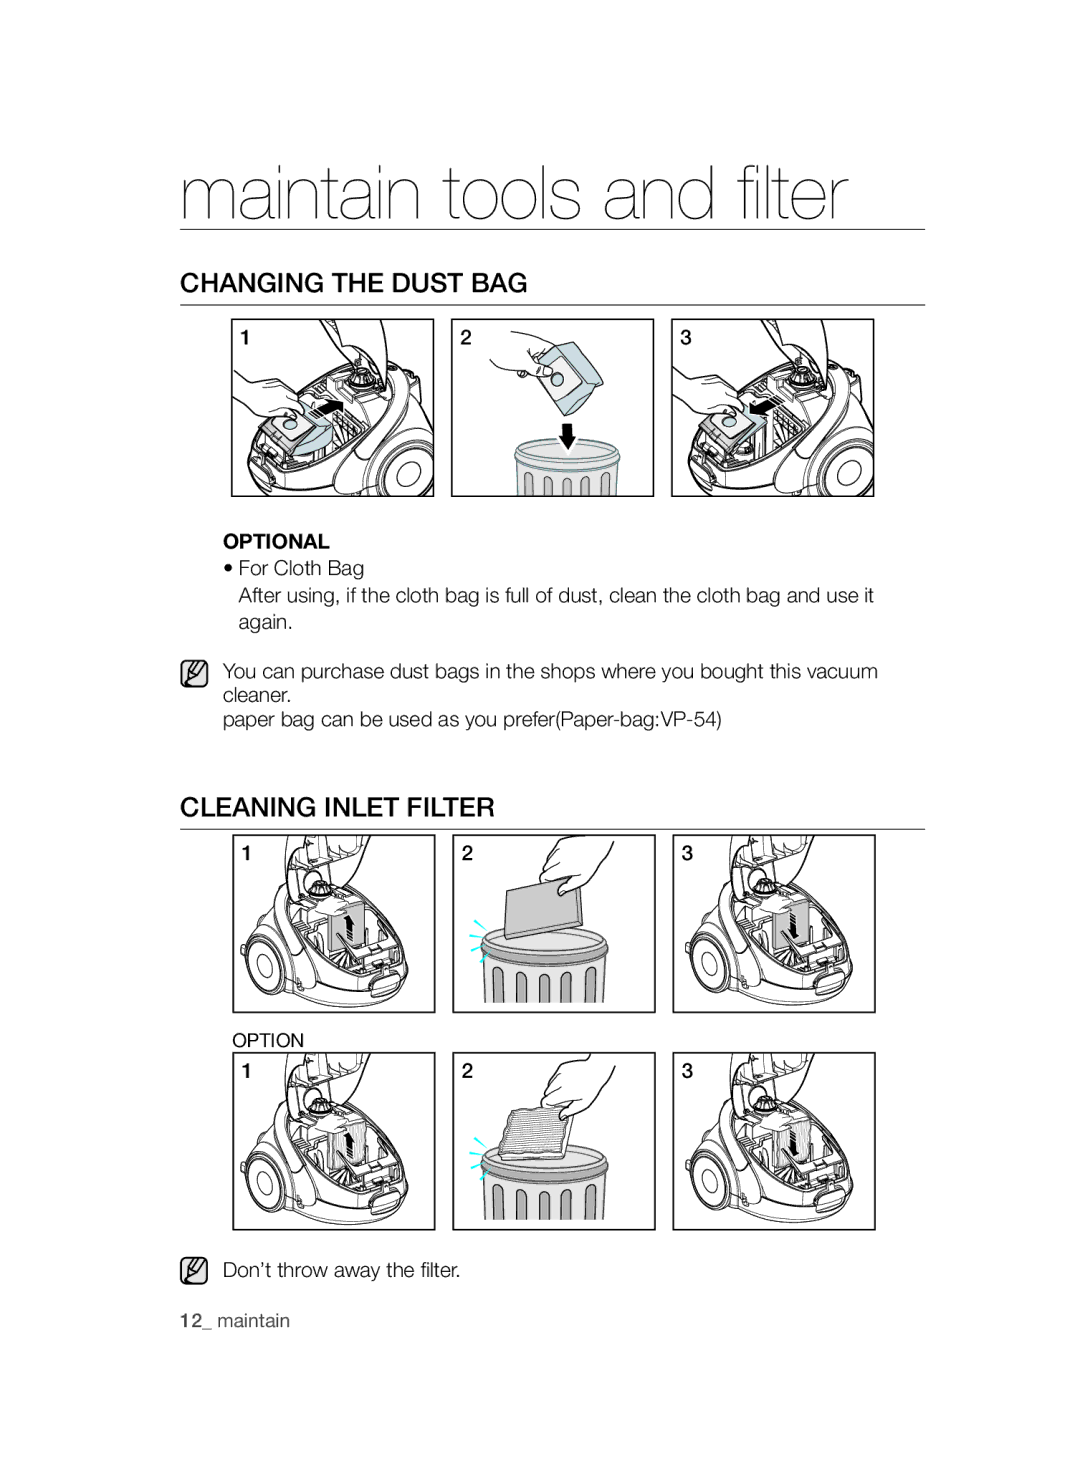 Samsung VCC5250V3R/XST, VCC52E5V3O/XEH, VCC52F0S3R/XEH, VCC5250V4O/ATC manual Changing the Dust BAG, Cleaning Inlet Filter 